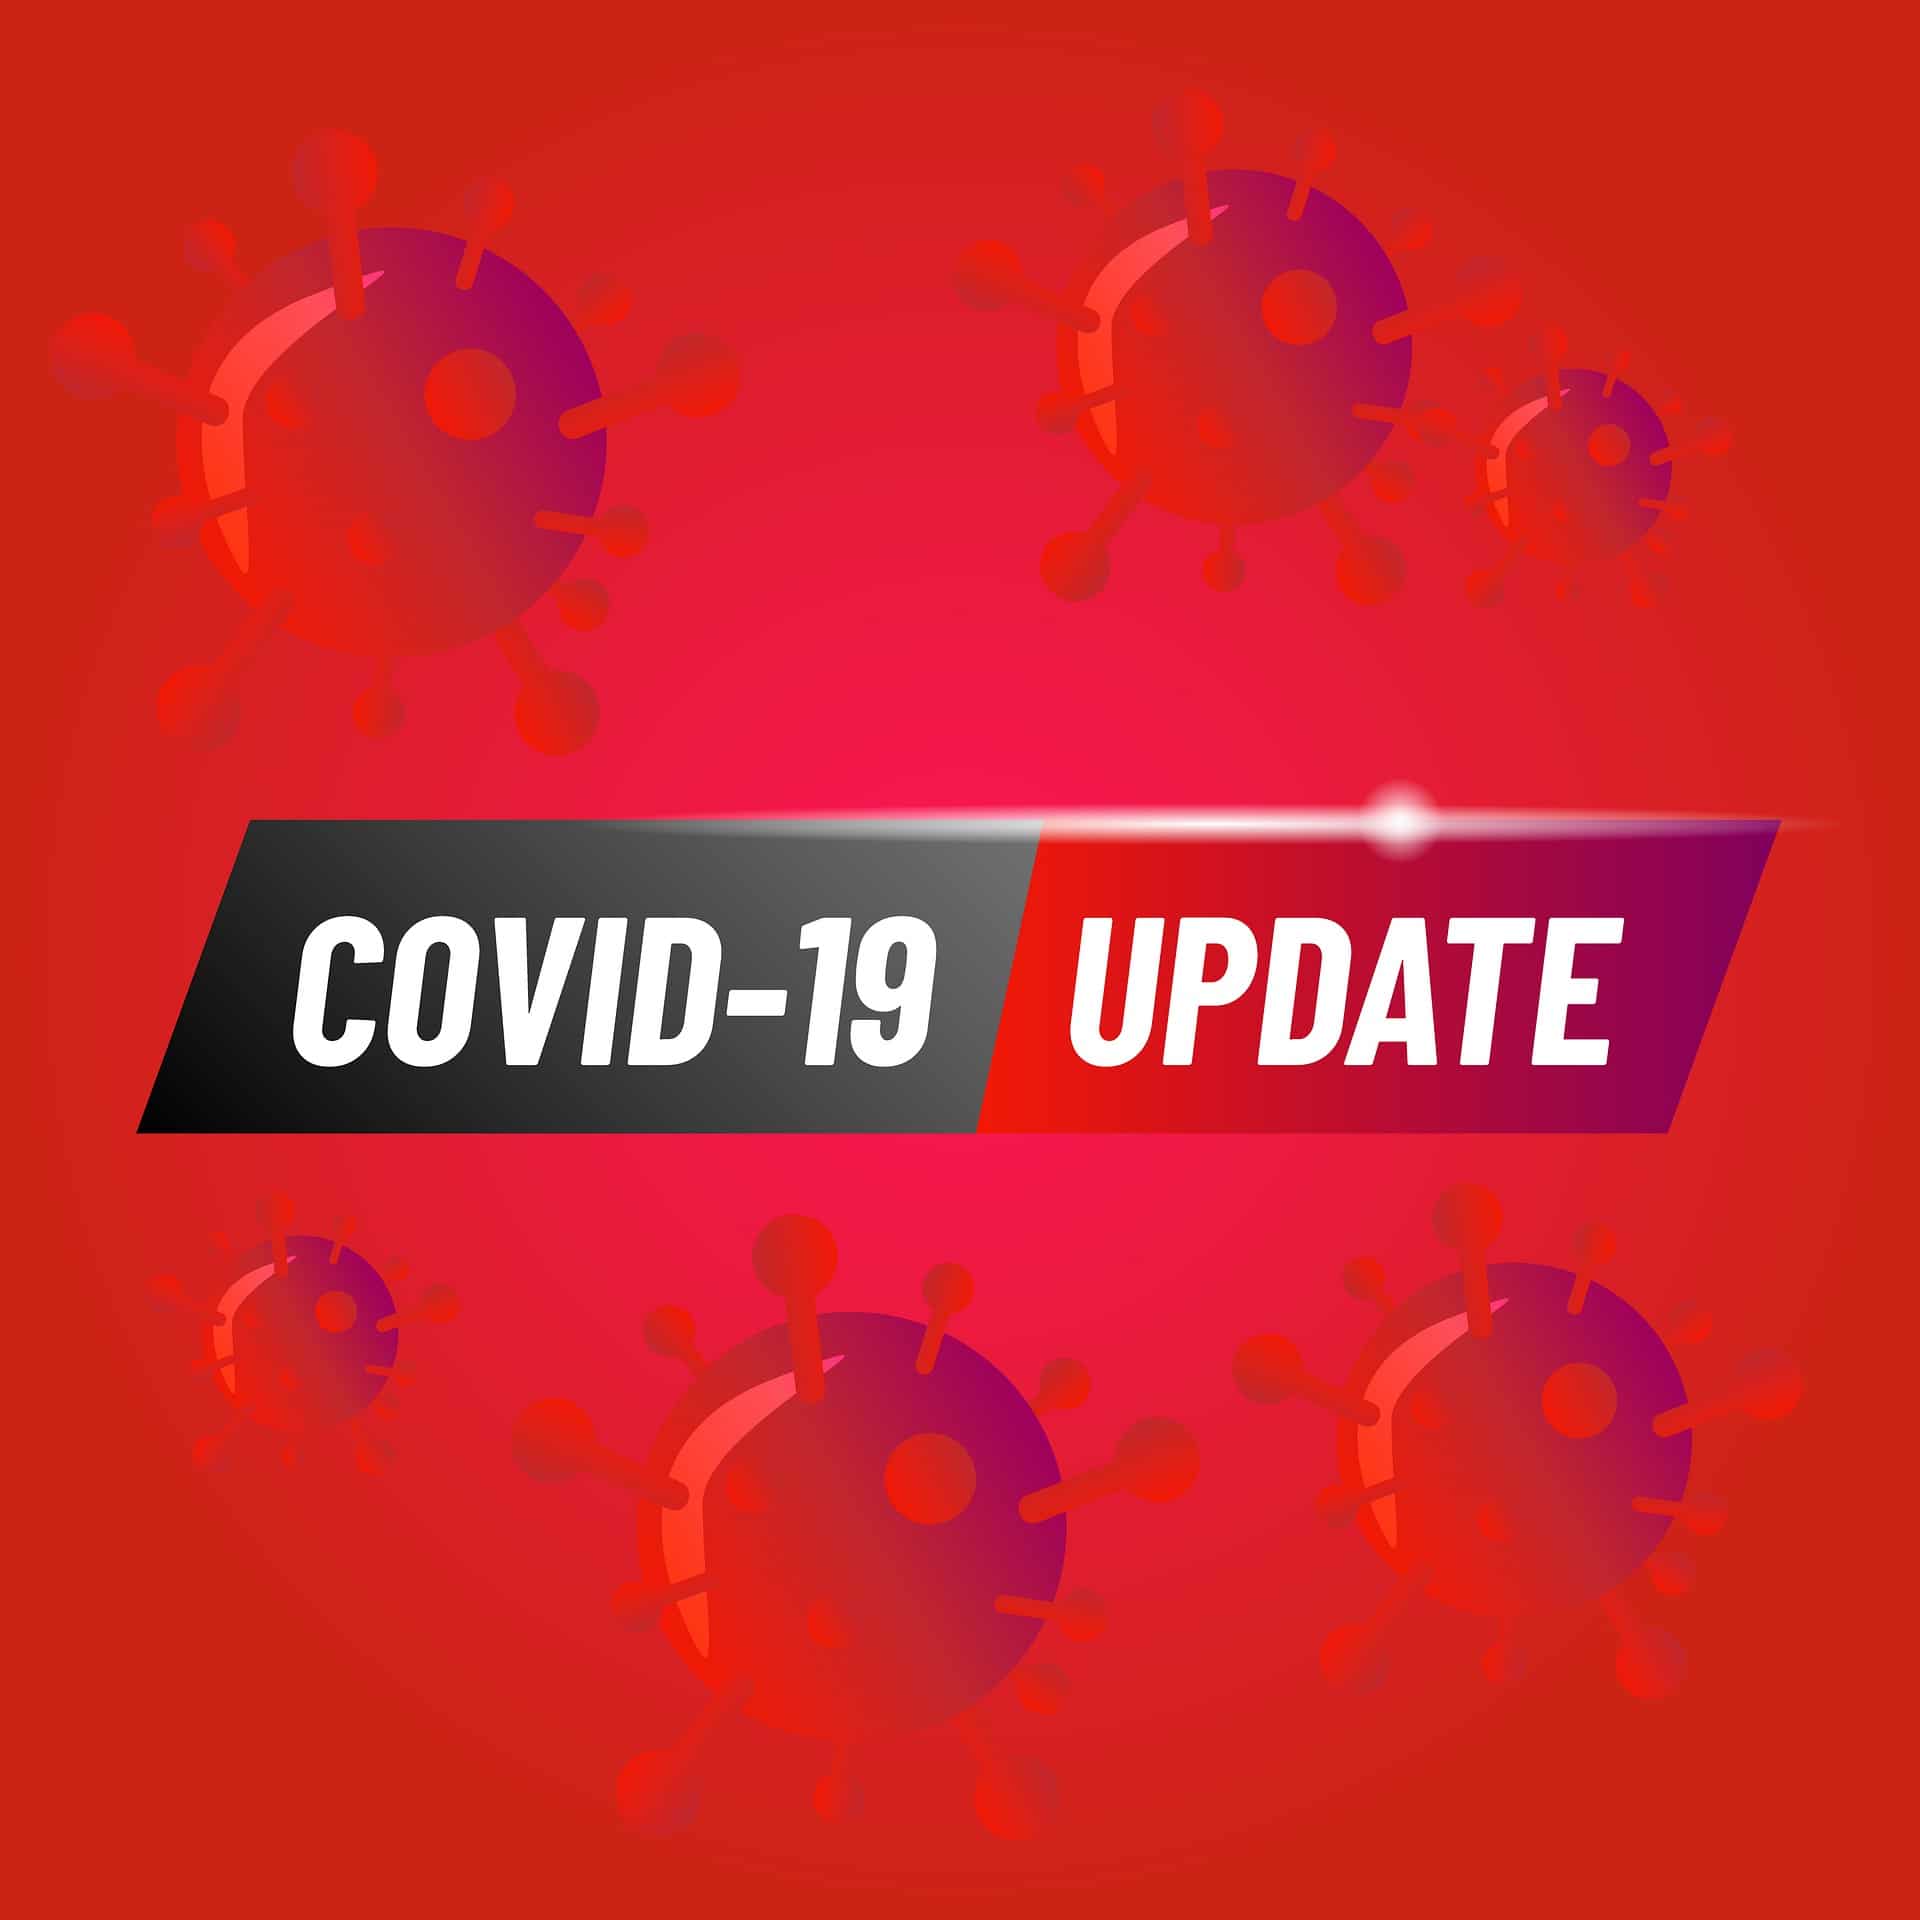 Covid-19 Update 17 May 2021